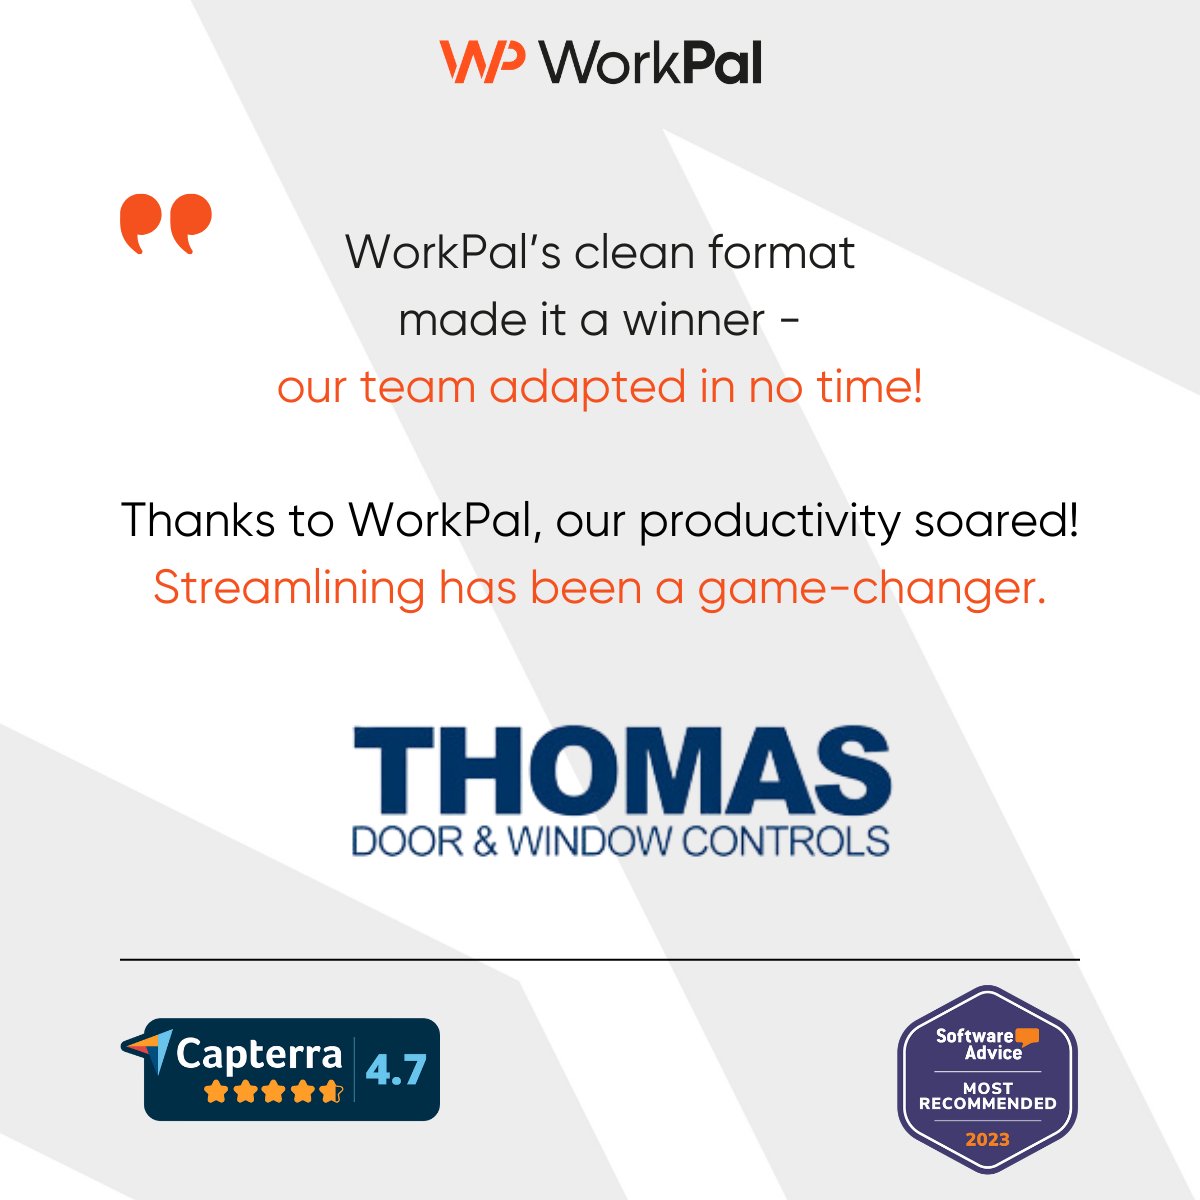 🚪 Thomas Door & Window Controls revolutionised their operations with WorkPal! 

Discover how WorkPal can transform your business with our free no obligation demo ow.ly/V3Nj50RnNZh

#facilitiesmanagement #assetmanagement #hvac #plumbing #firesafety #fieldservice #paperless